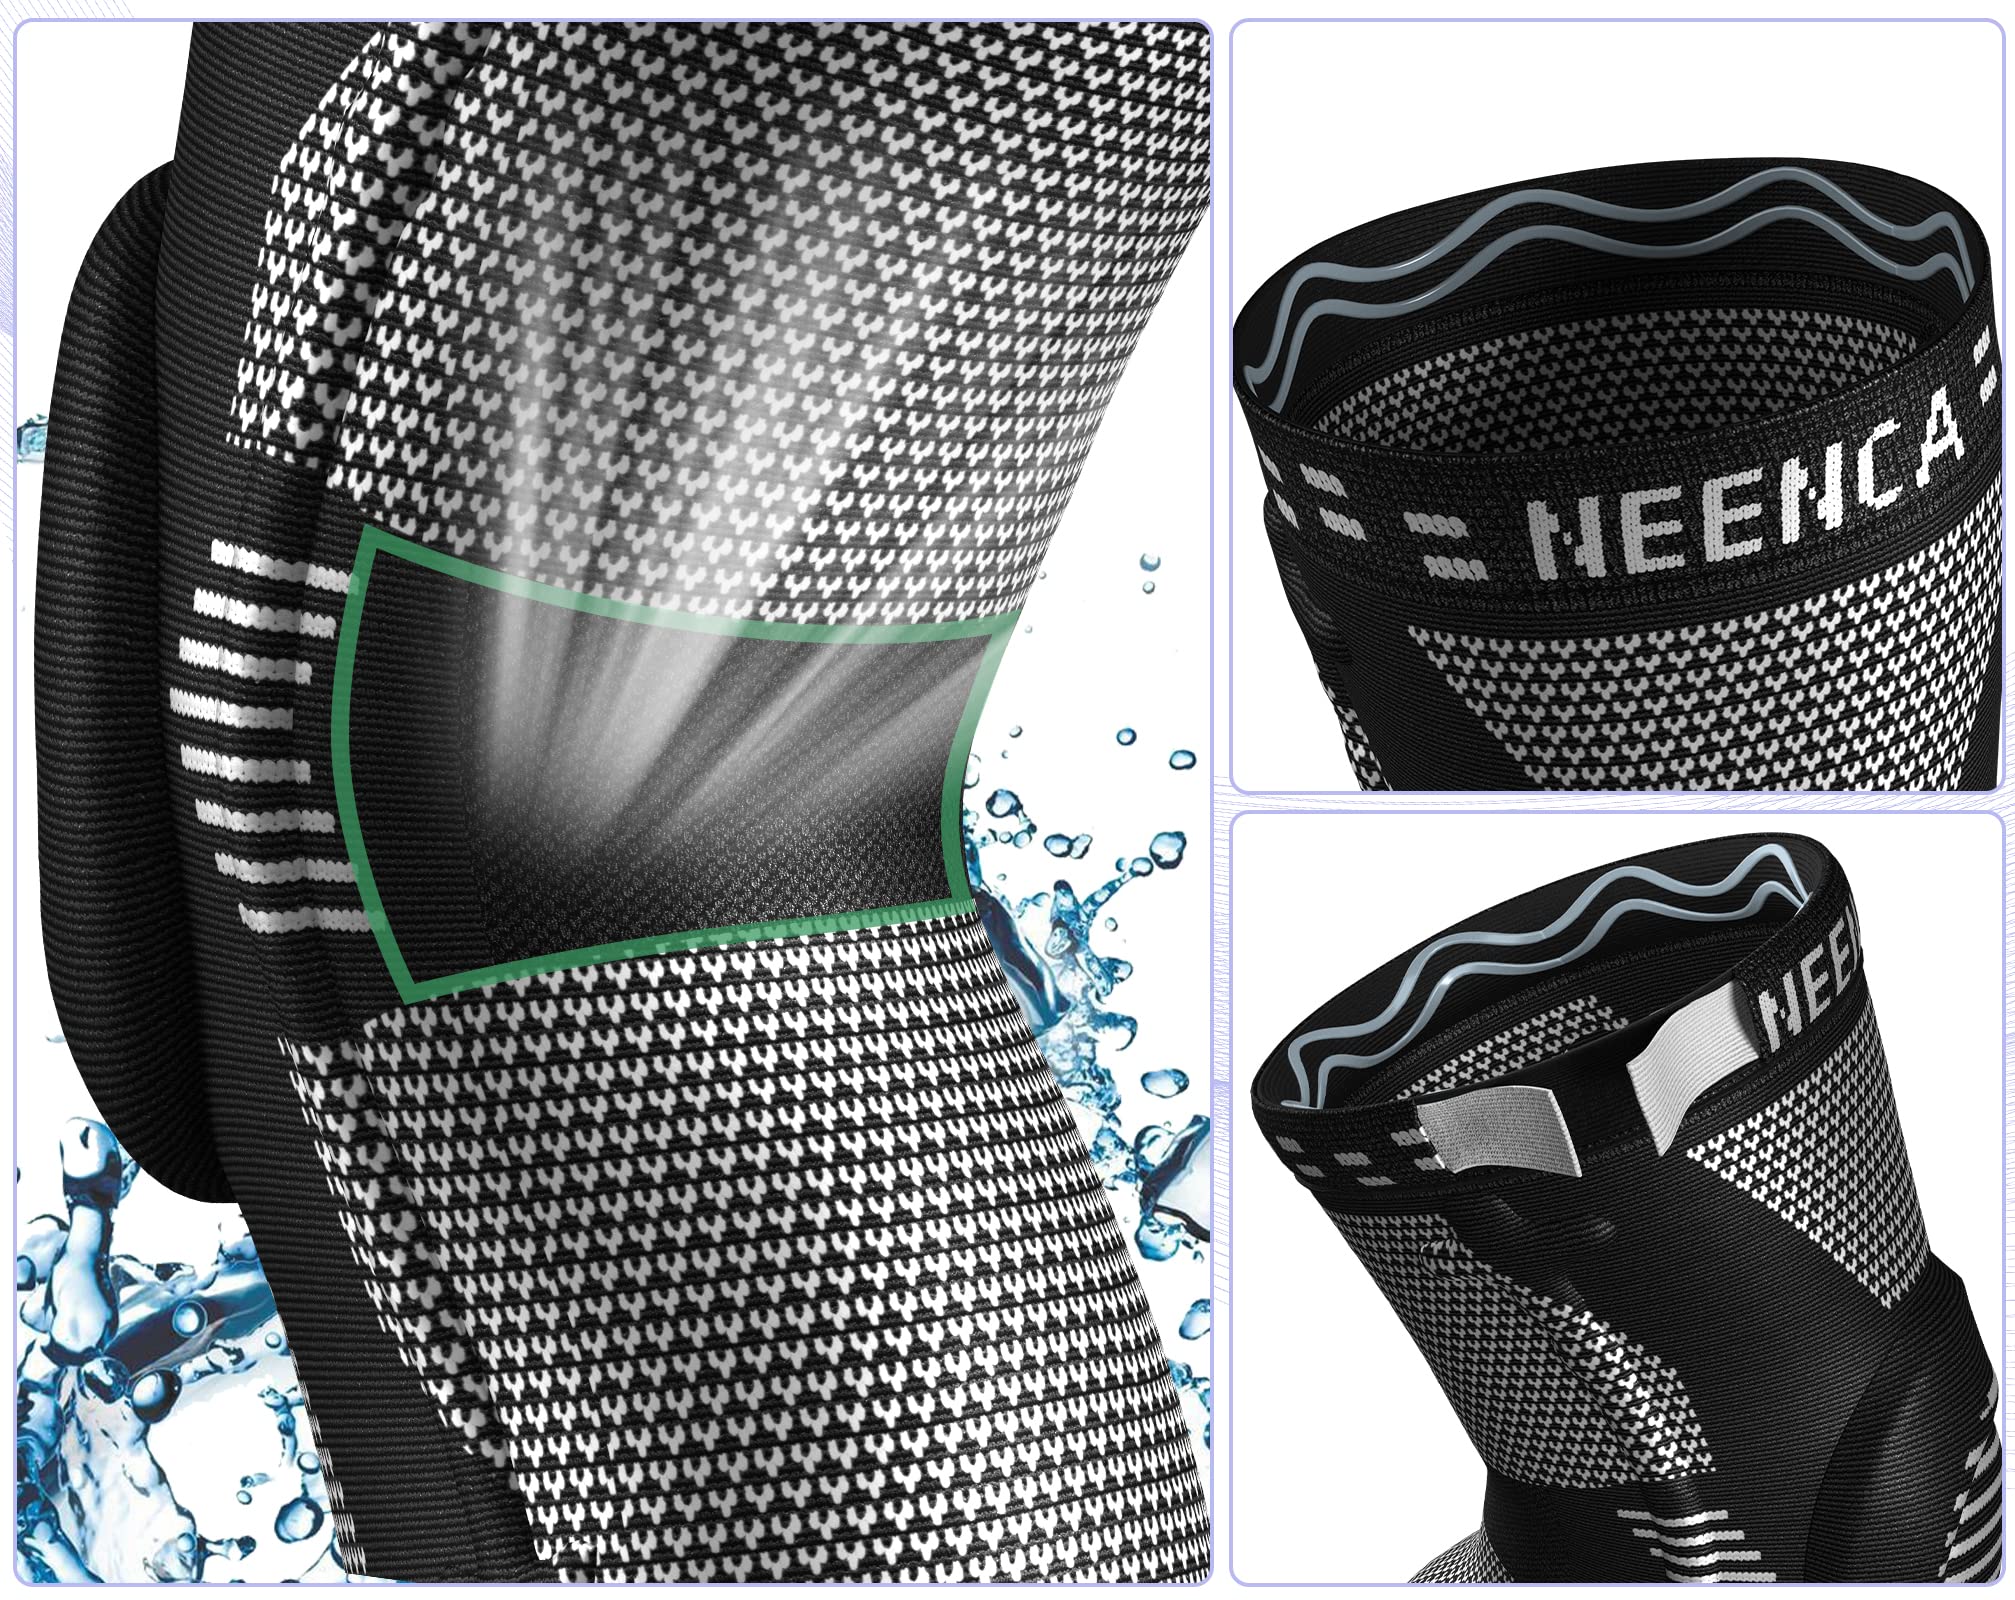 NEENCA 2 Pack Knee Braces for Knee Pain, Compression Knee Sleeves with Patella Gel Pad & Side Stabilizers, Knee Support for Men Women, Meniscus Tear, Arthritis, Joint Pain, ACL,PCL,MCL,Runner, Workout